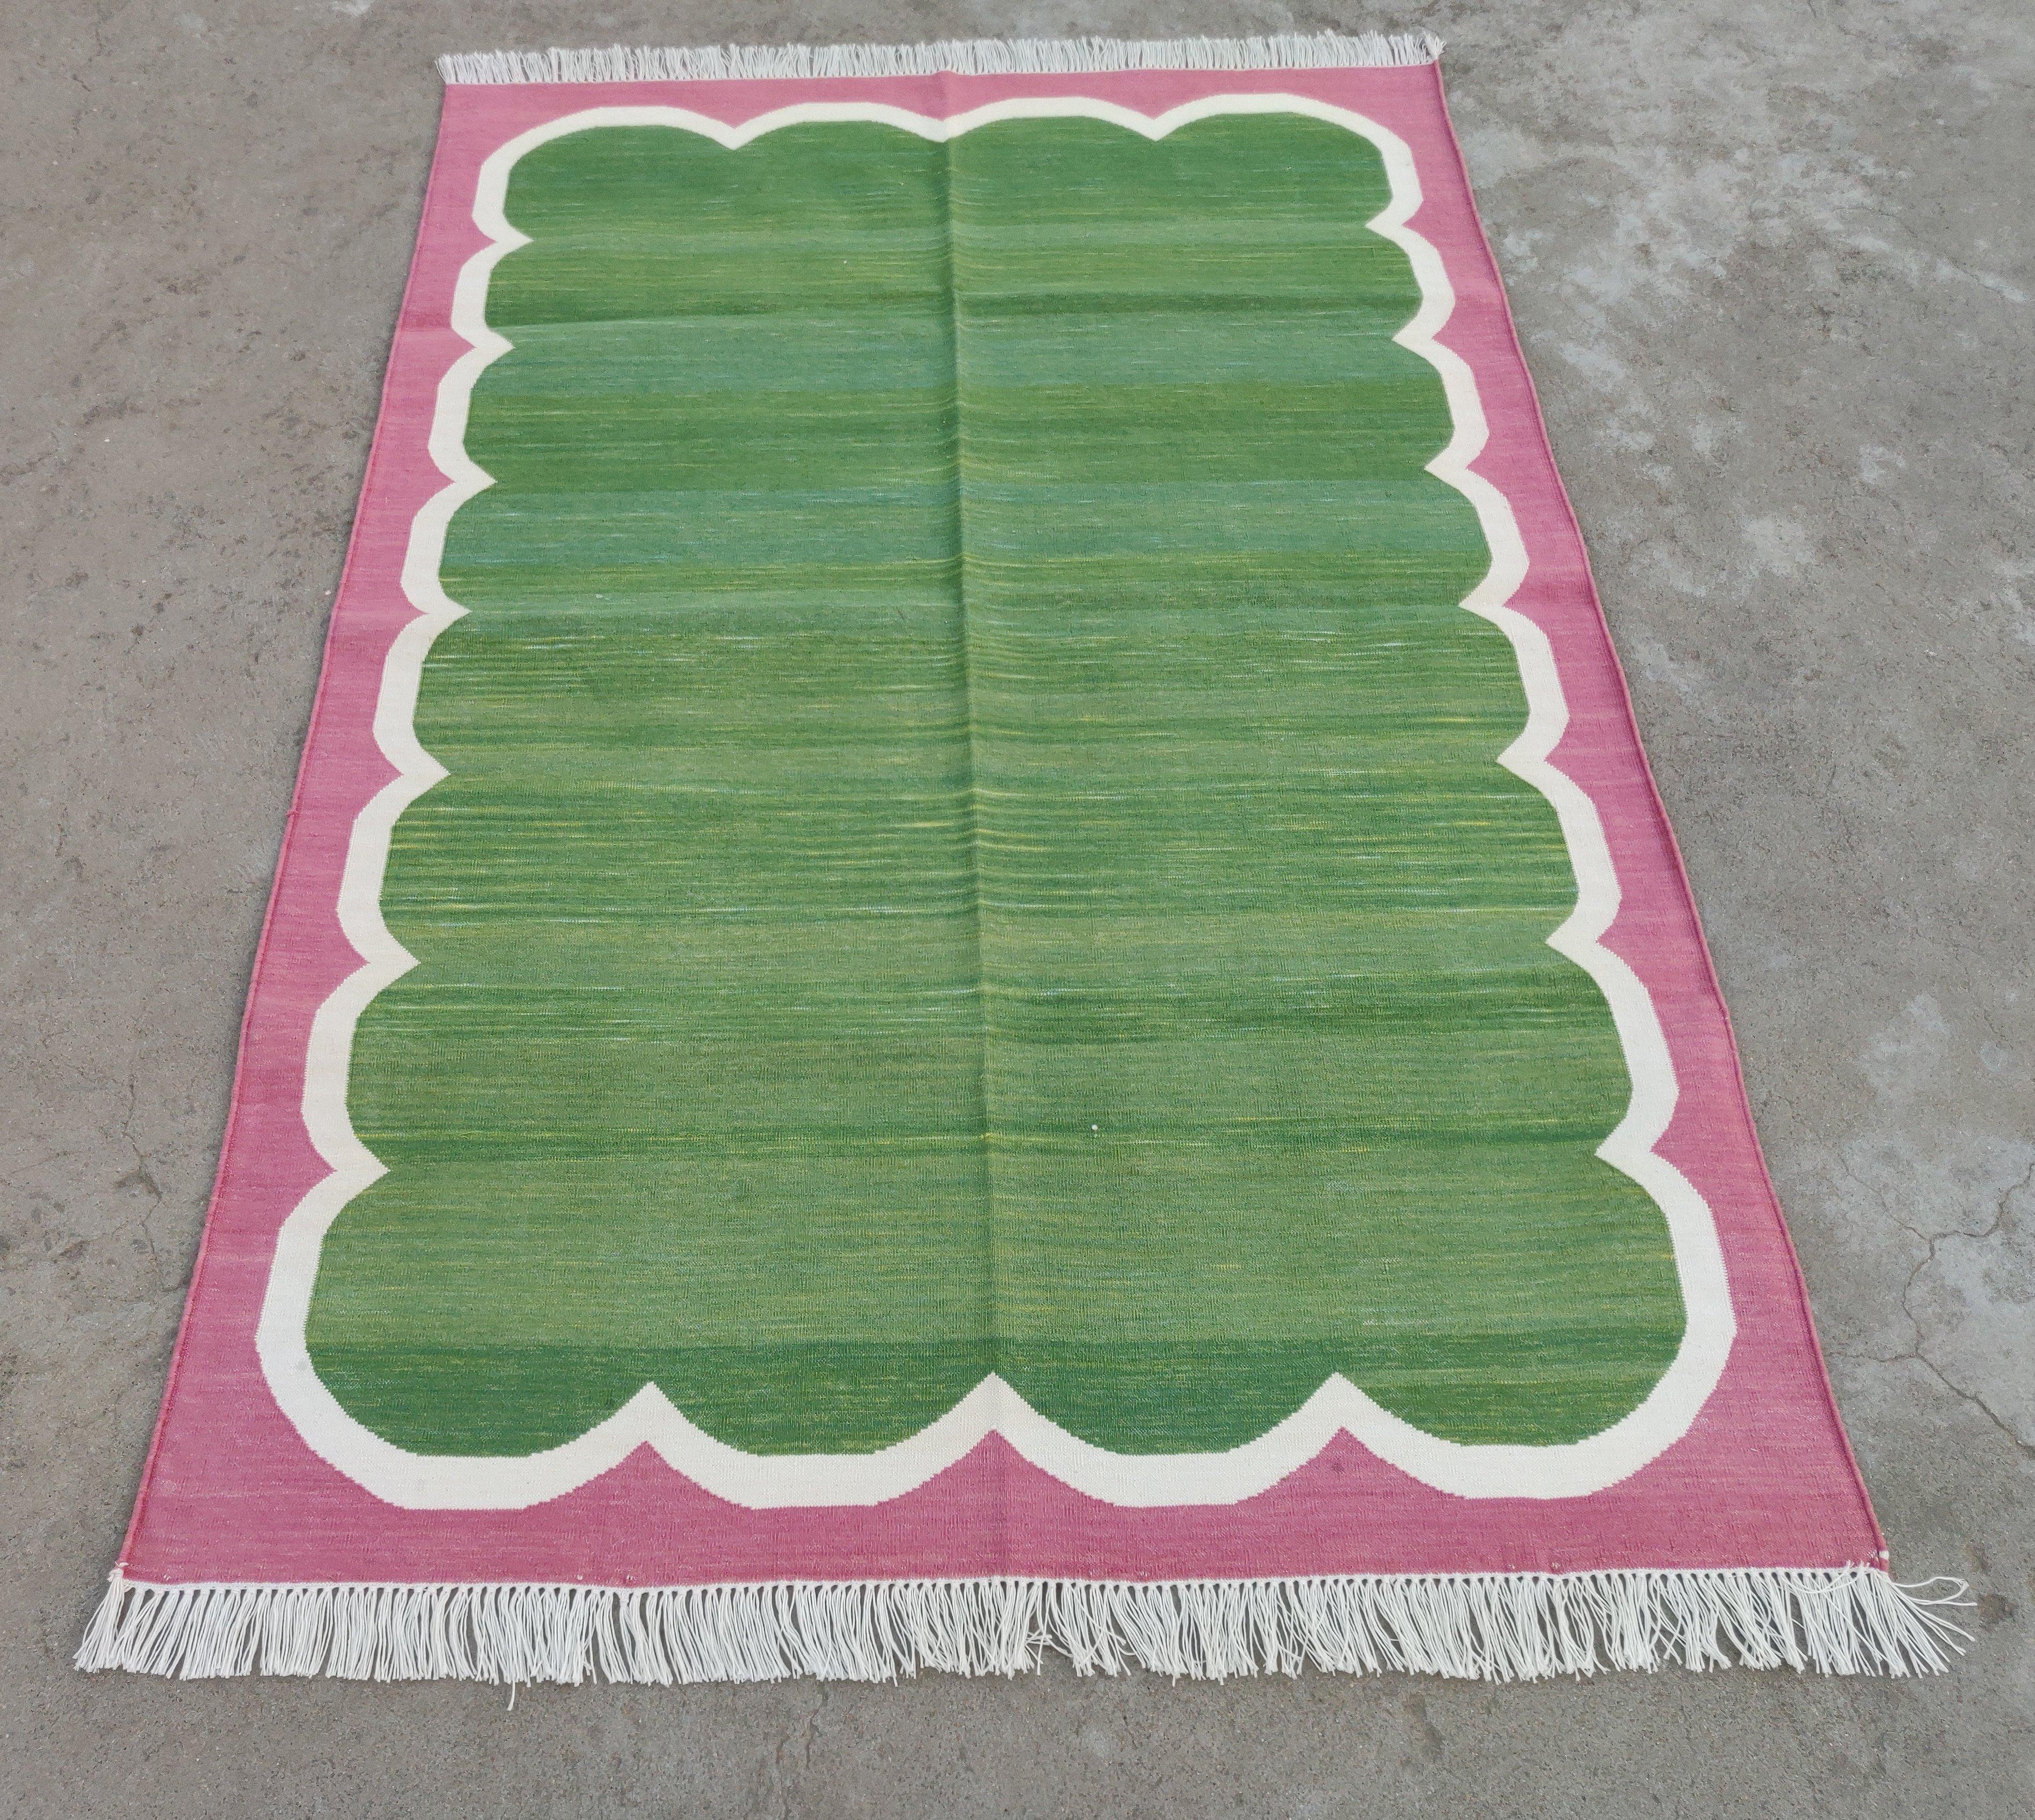 Hand-Woven Handmade Cotton Area Flat Weave Rug, 5x7 Green And Pink Scallop Striped Dhurrie For Sale